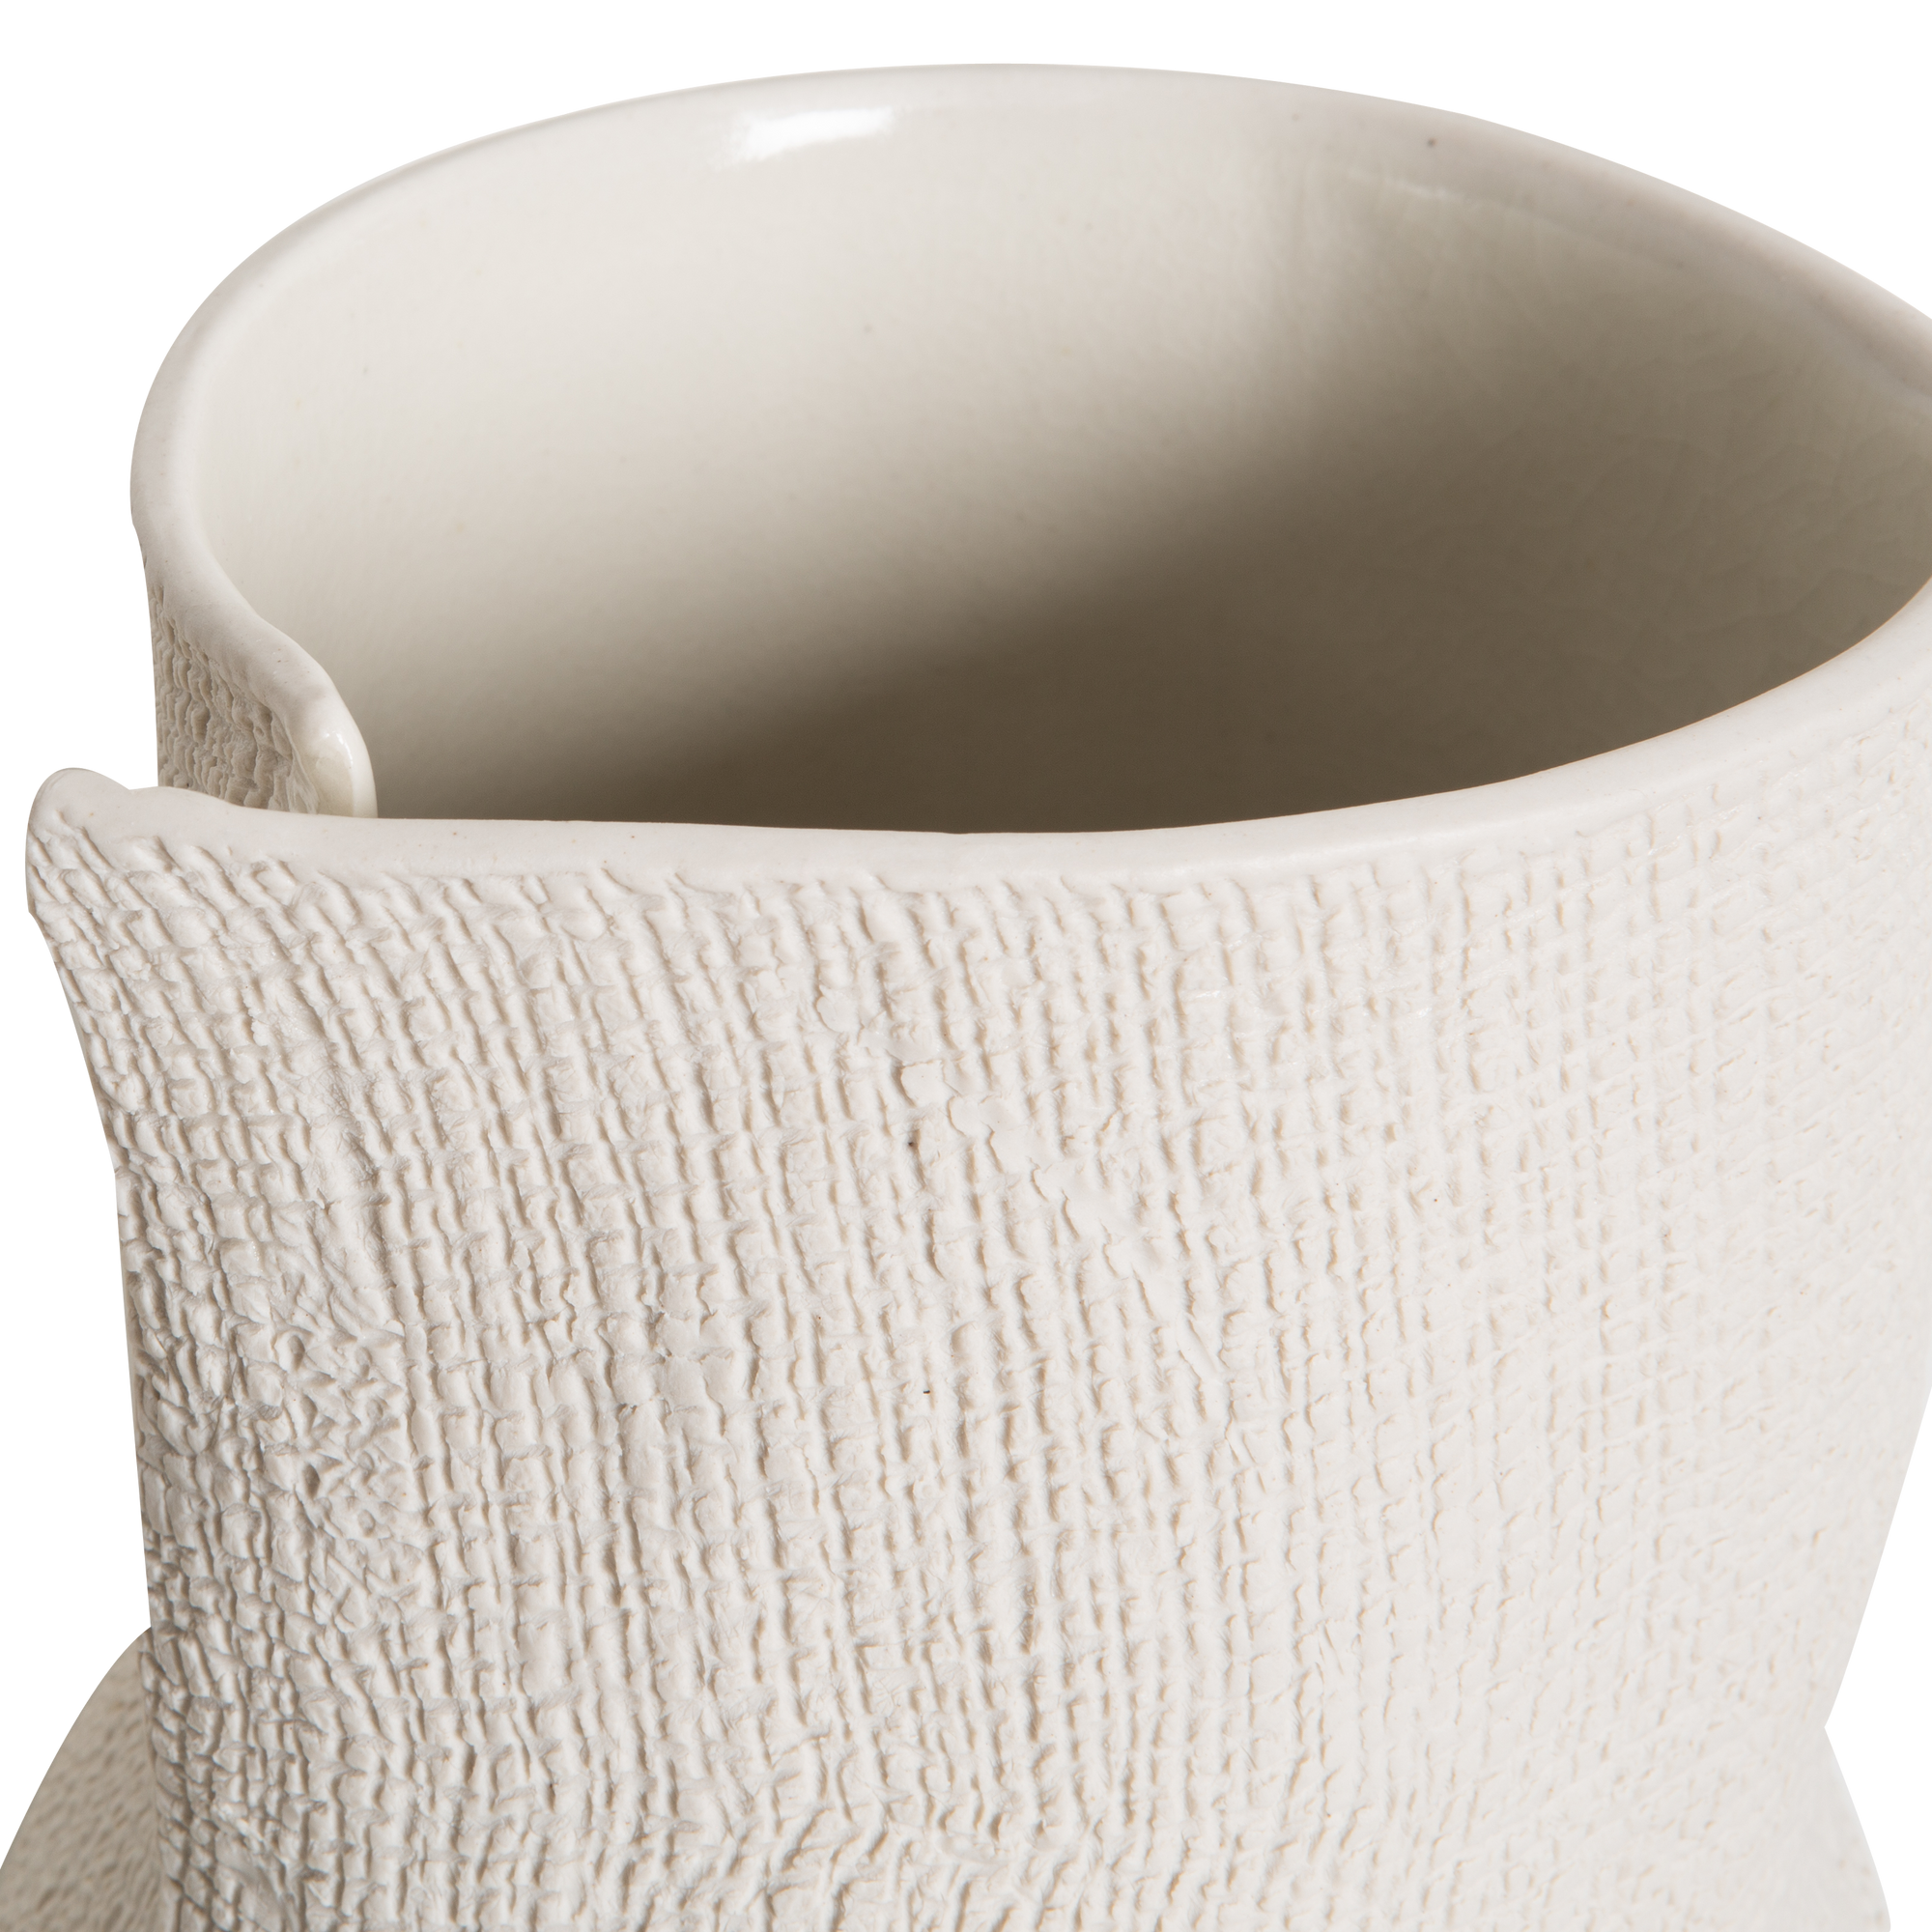 Embracing the beauty of imperfection, the Burlap Bottle Vase is uniquely textured and this intentionally imperfect vase was handcrafted using vitreous high-fire, pure porcelain.